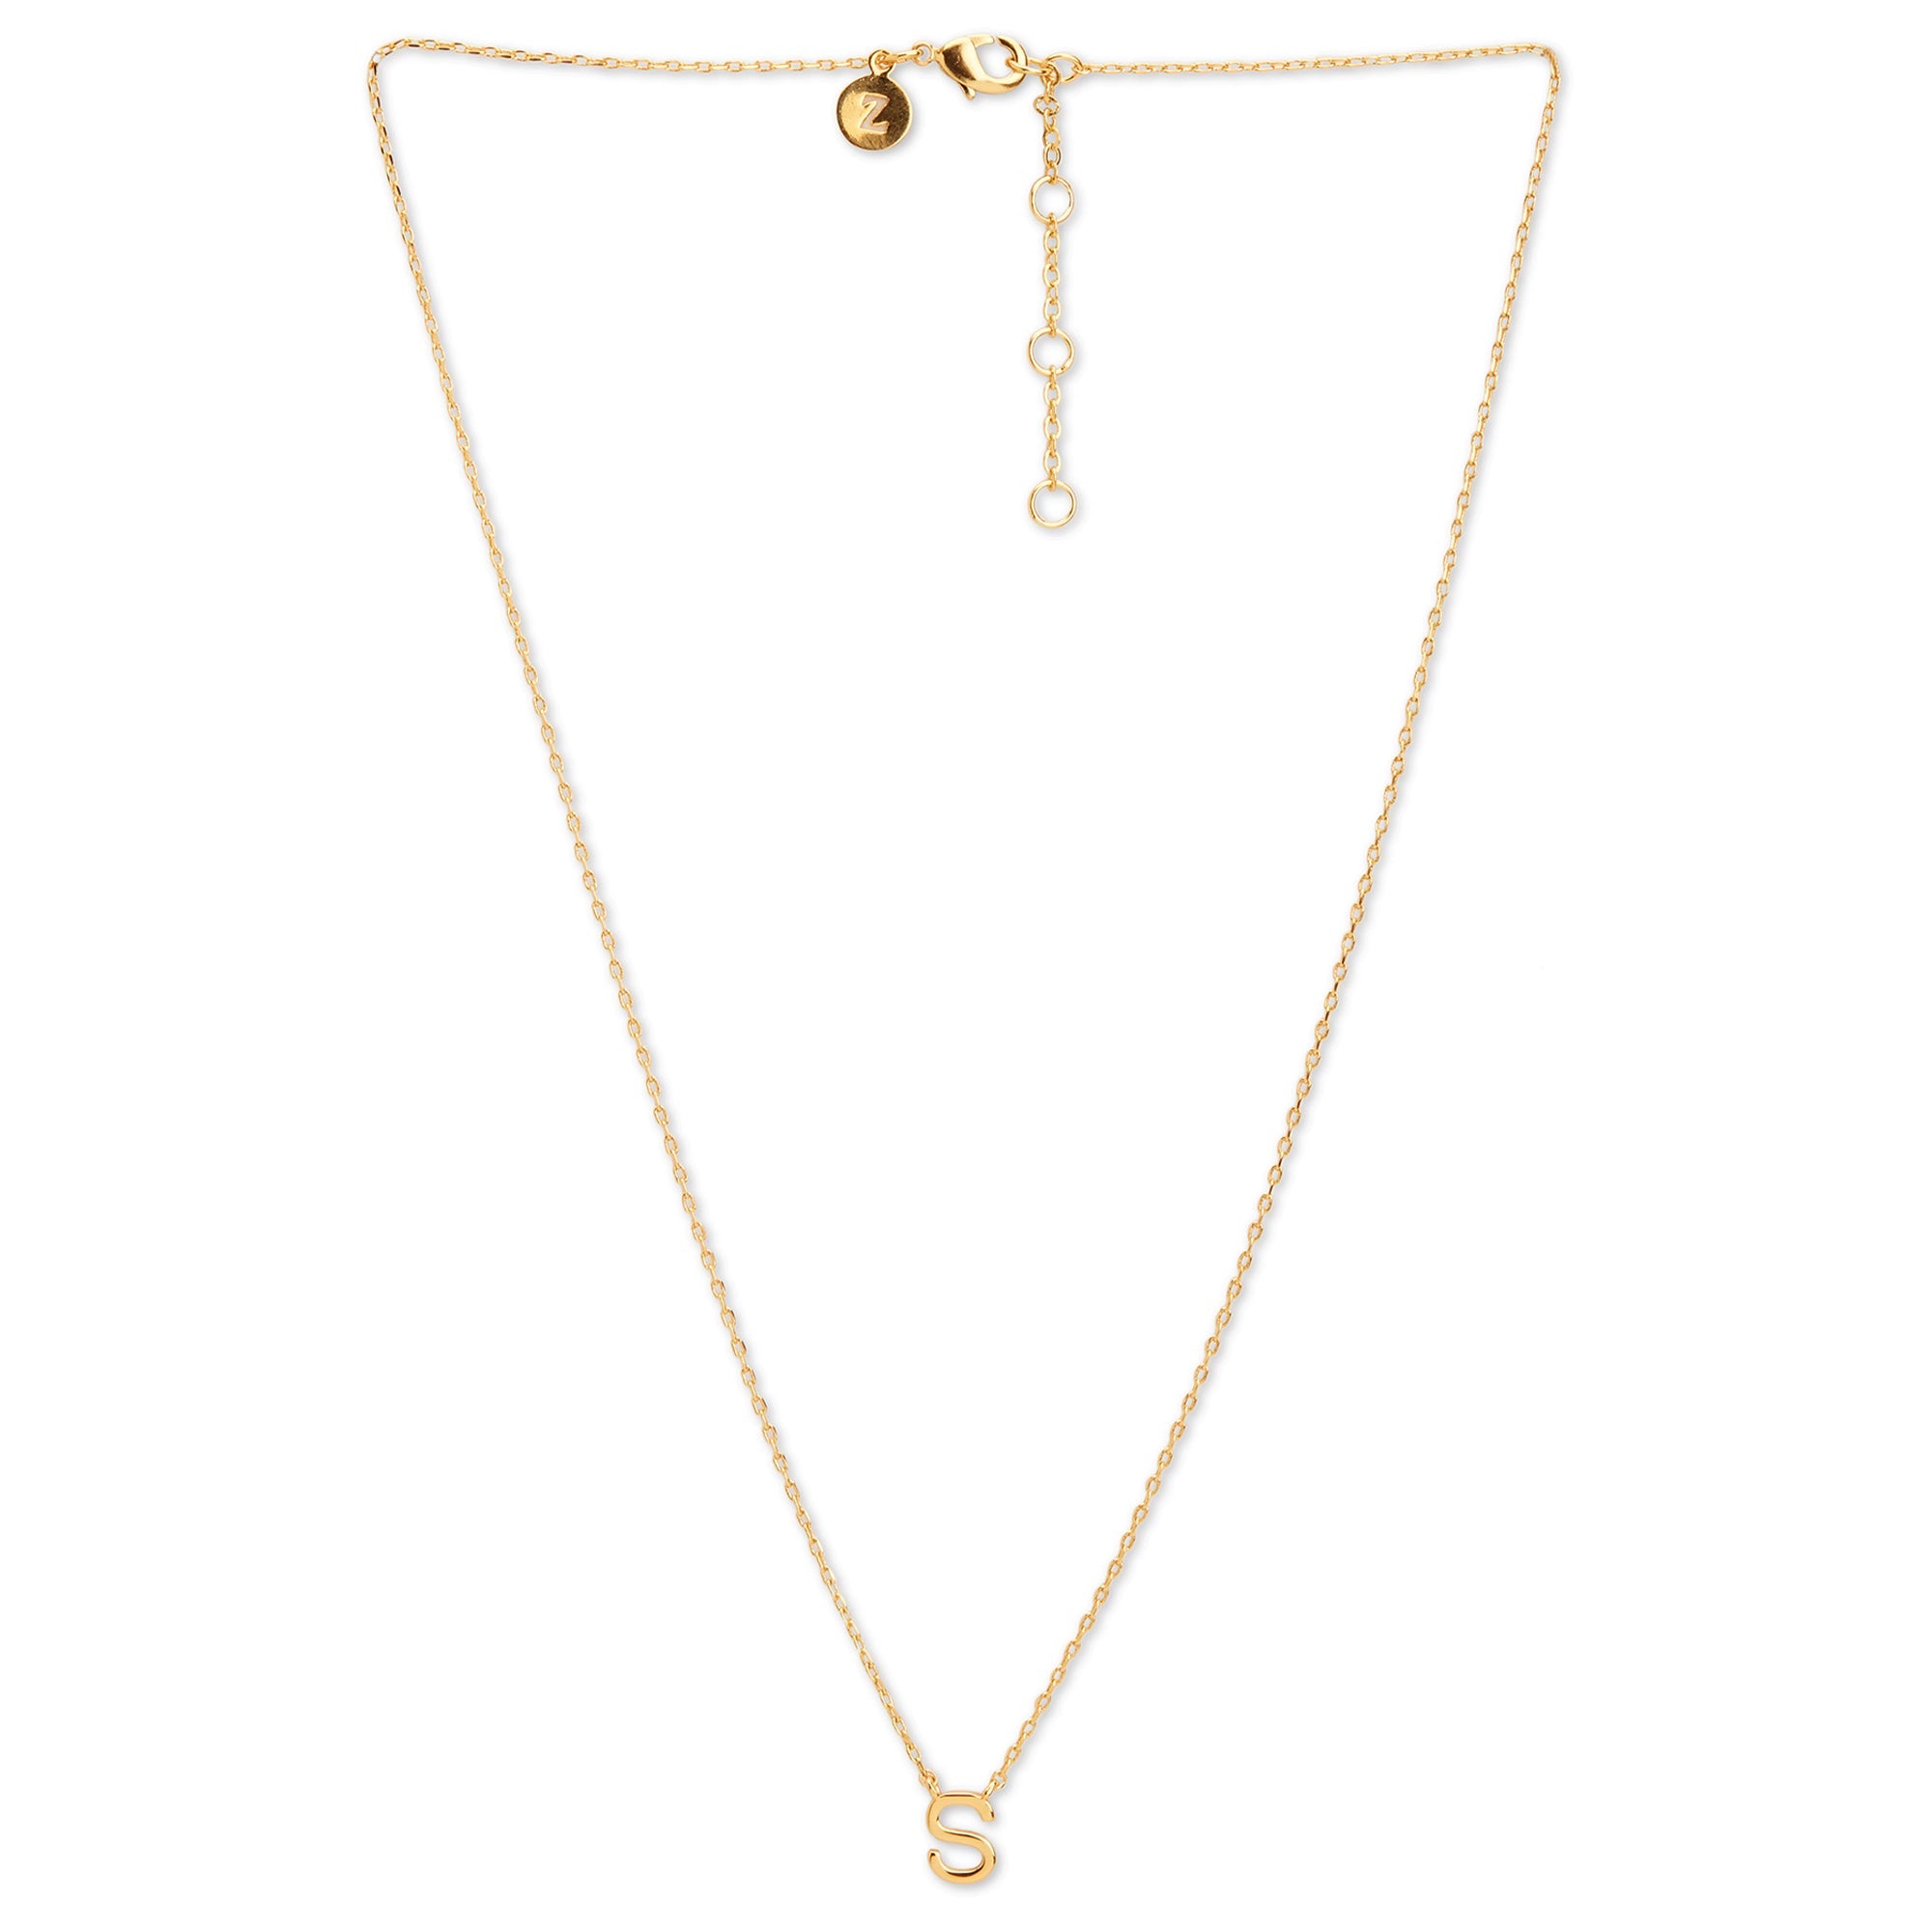 Real Gold Plated Gold Z Linked Initial "S" Pendant Necklace